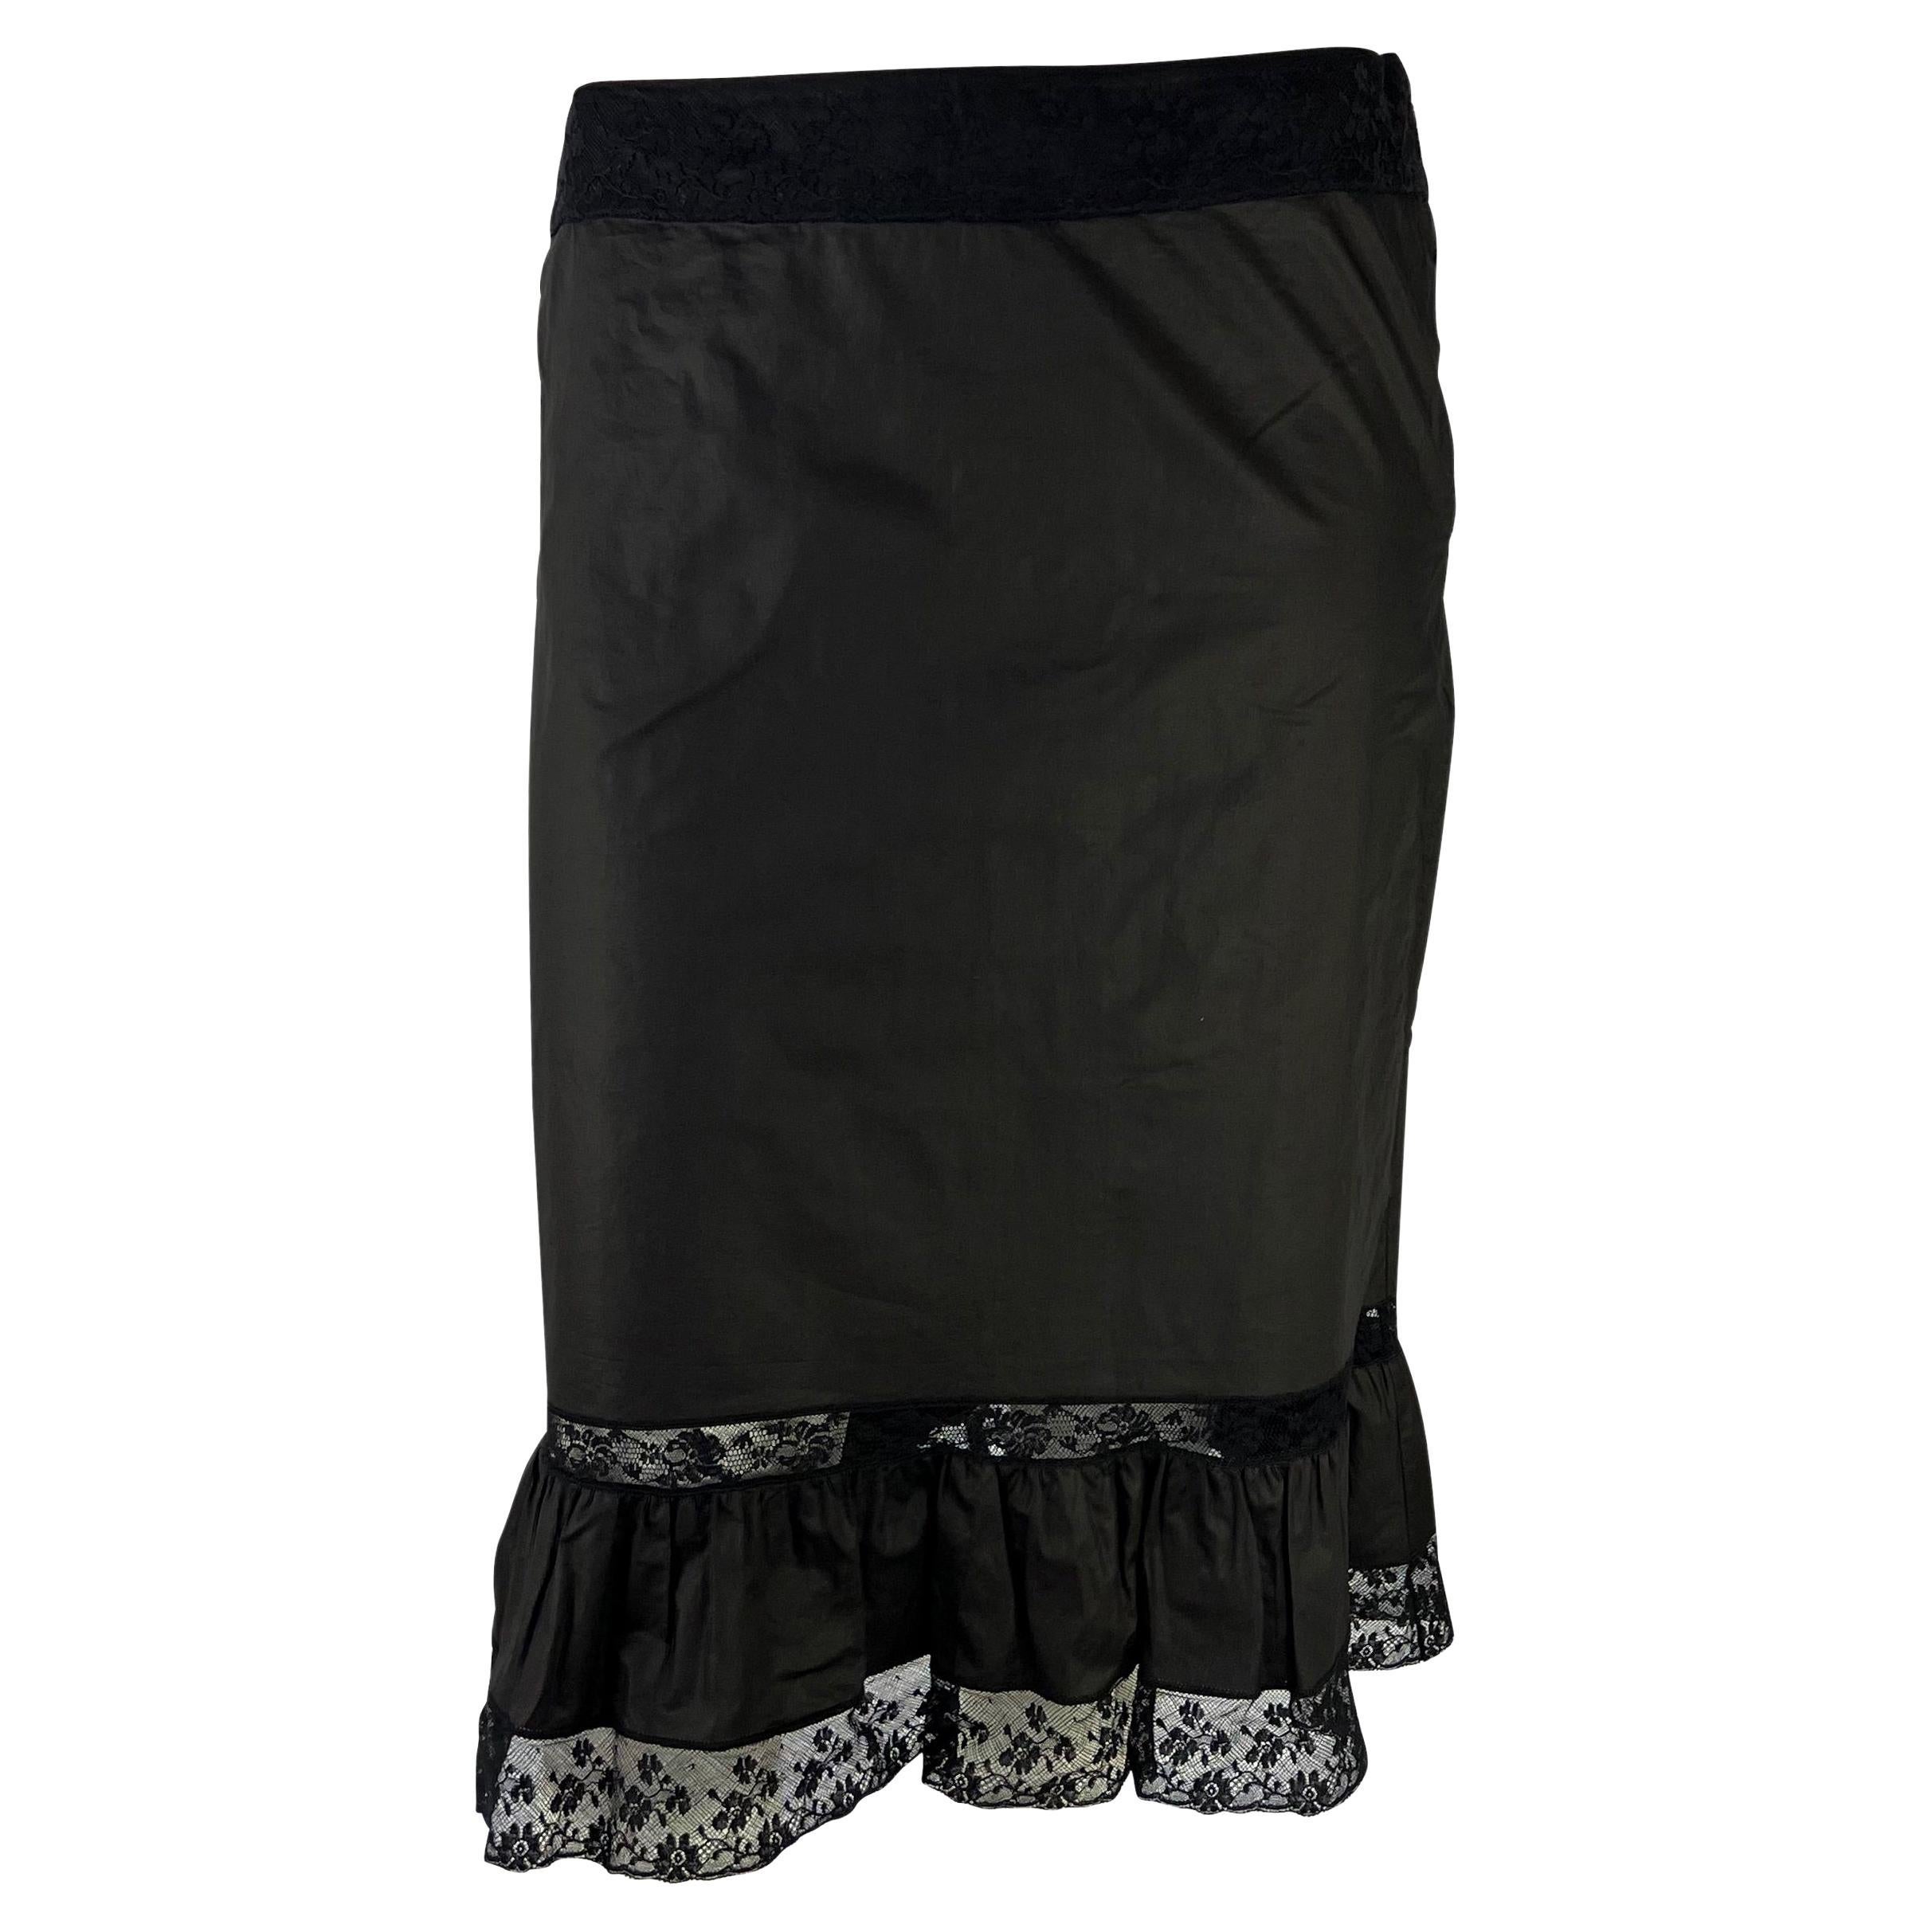 S/S 2002 Gucci by Tom Ford Cotton Black Lace Trim Ruffle Skirt For Sale